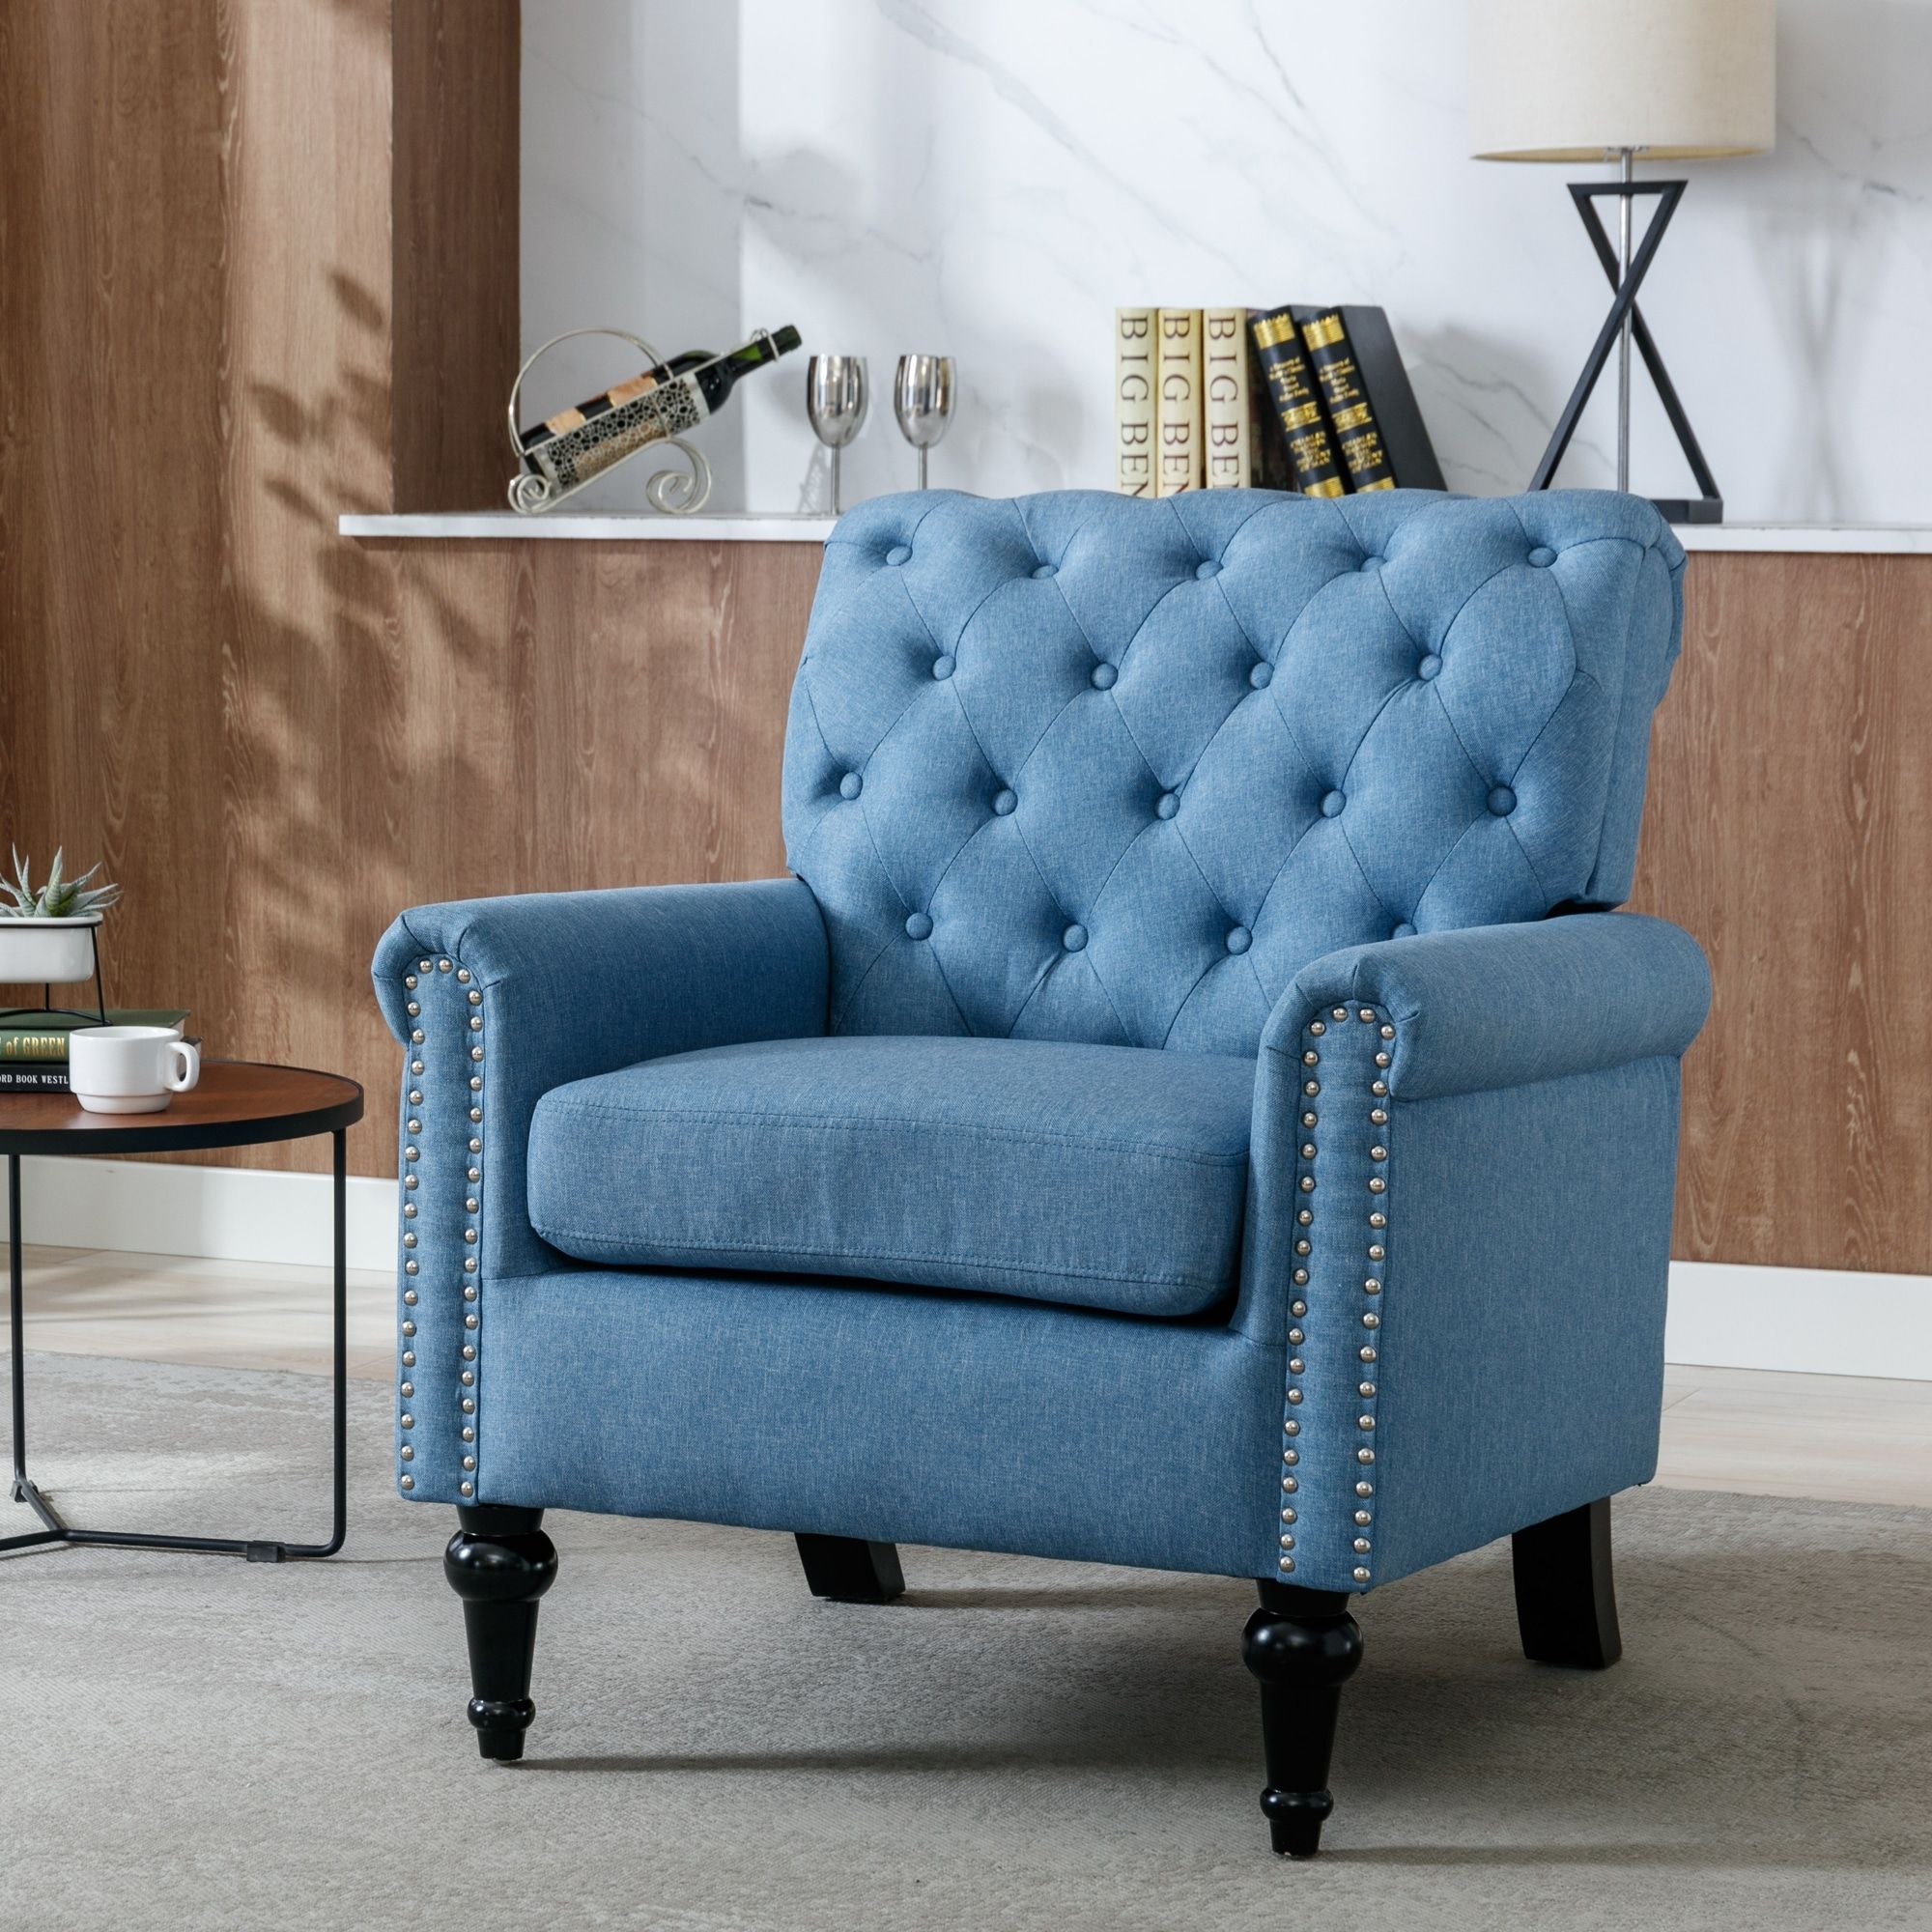 Tufted Upholstered Accent Chairs Single Sofa Chair For Livingroom With  Linen Fabric Armchairs Comfy Reading Chair – Bed Bath & Beyond – 38047189 Intended For Comfy Reading Armchairs (View 6 of 15)